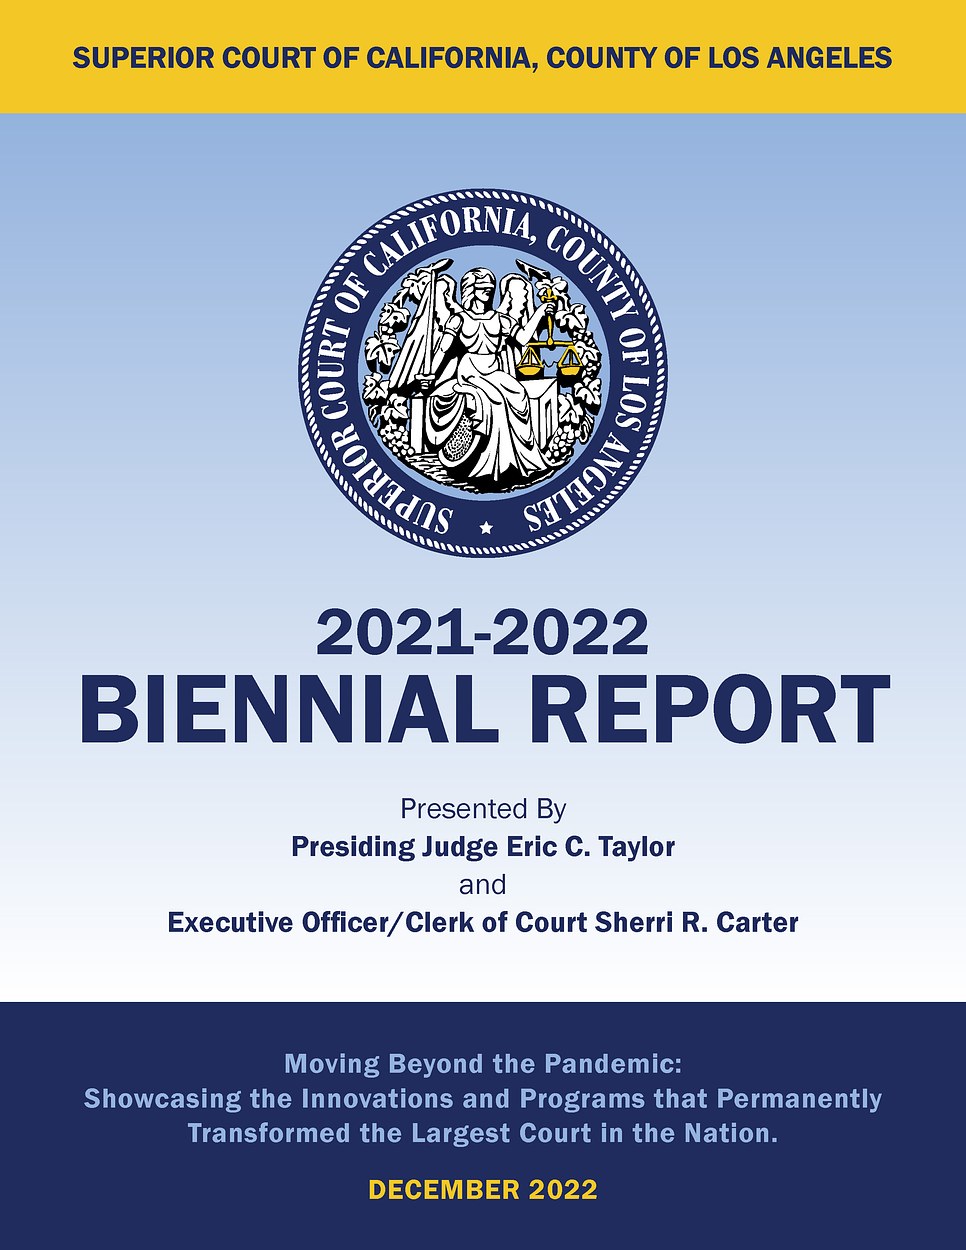 Biennial Report - Superior Court of California, County of Los Angeles